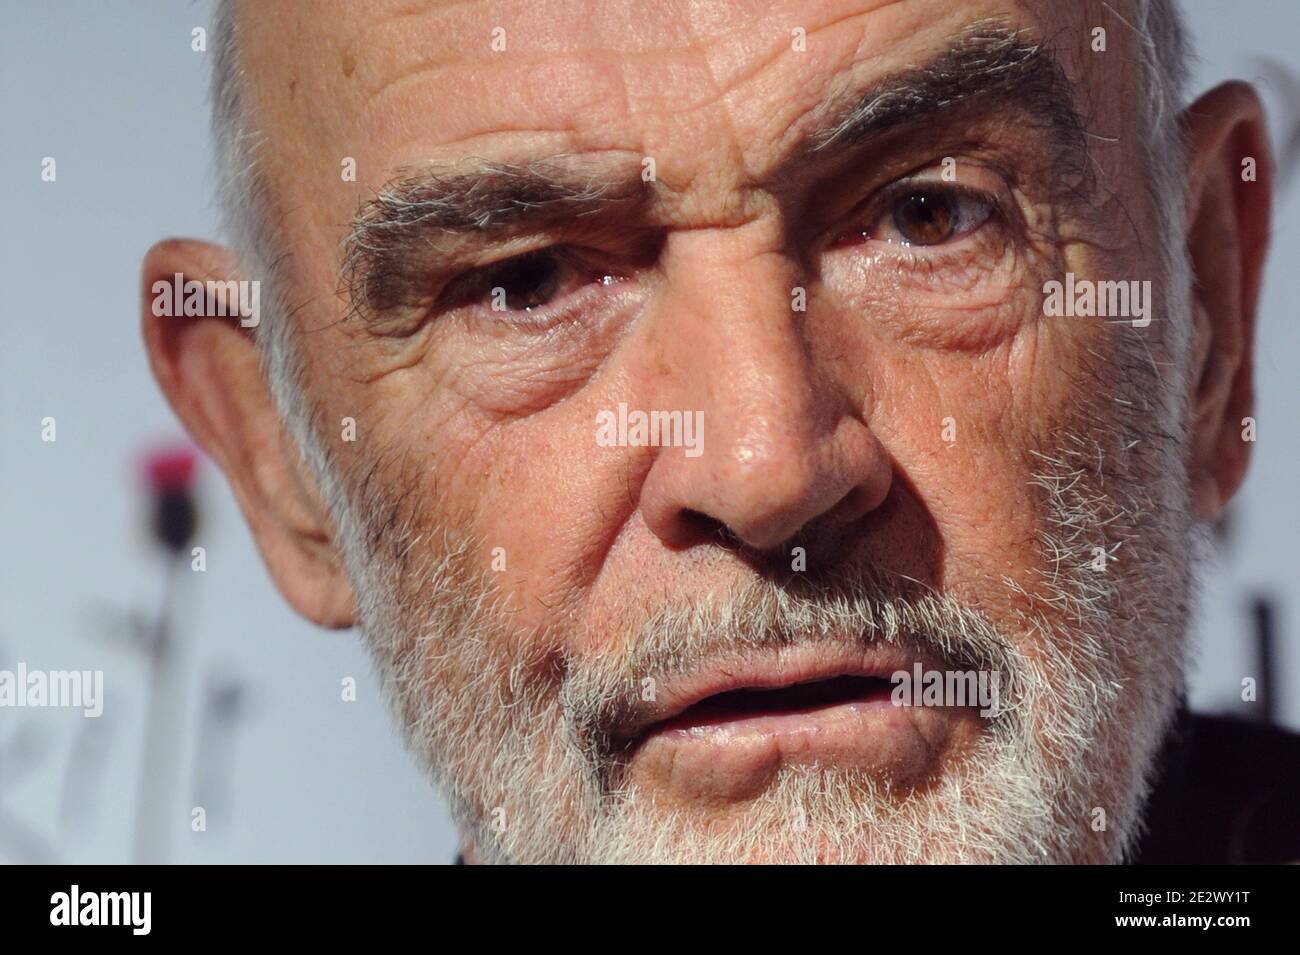 Sean Connery attends the 8th annual 'Dressed To Kilt' Charity Fashion Show presented by Glenfiddich at M2 Ultra Lounge in New York City, NY, USA on April 5, 2010. Photo by Mehdi Taamallah/ABACAPRESS.COM (Pictured: Sean Connery) Stock Photo